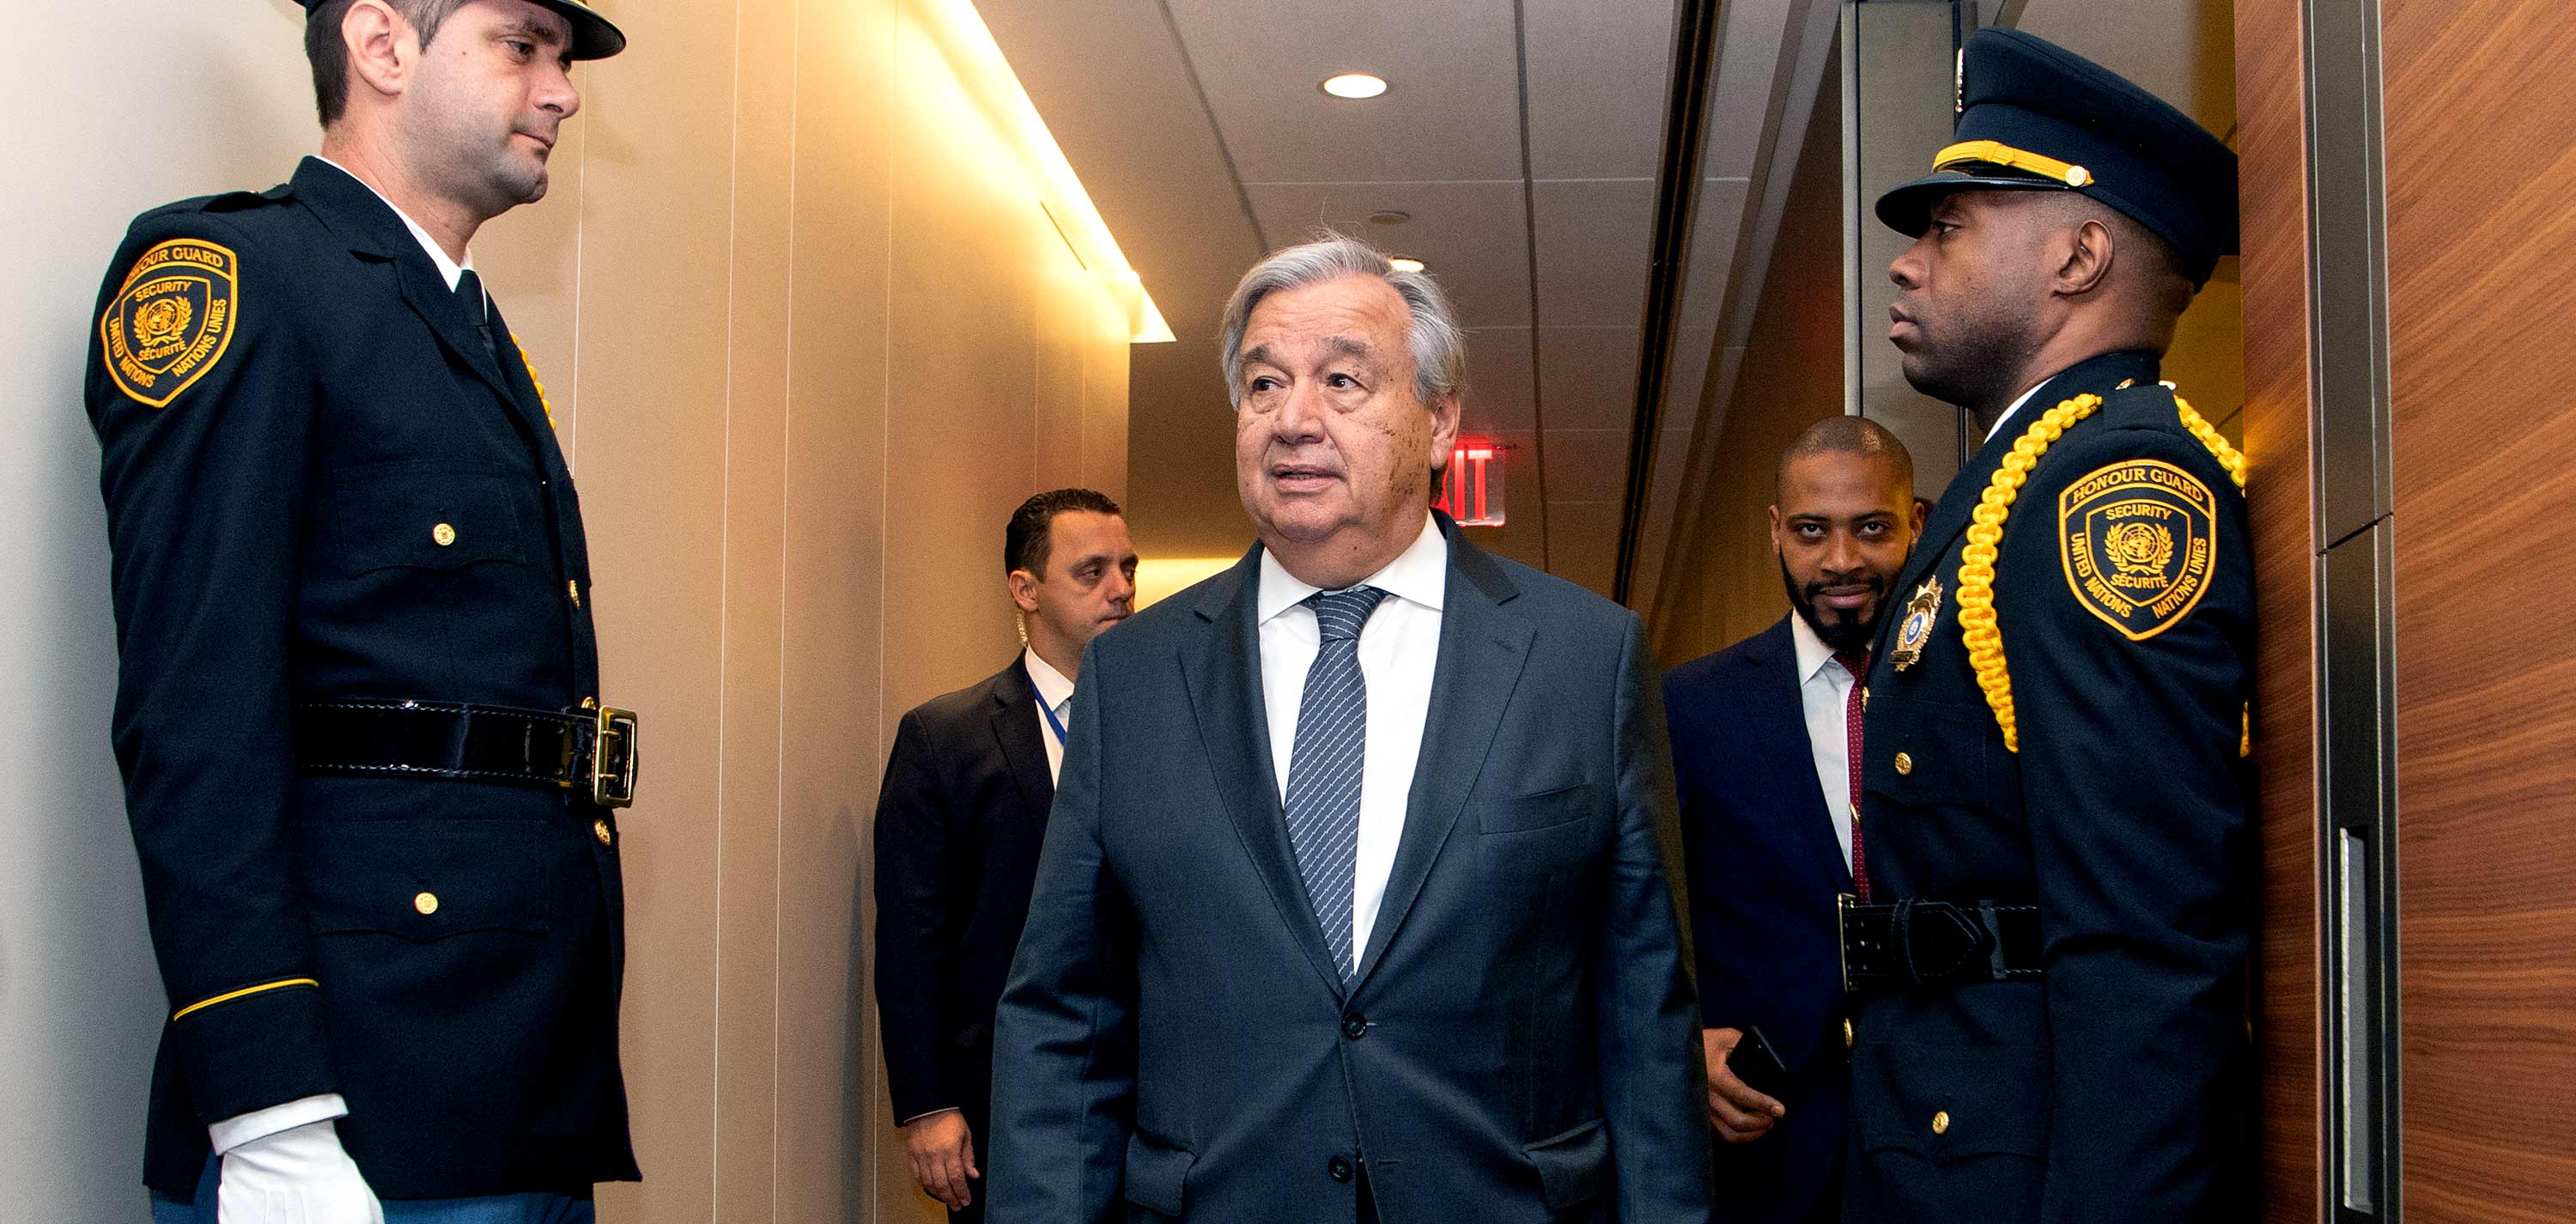 Secretary-General António Guterres, protected by UN Security Service Officers, is on his way to the General Assembly Hall during the General Assembly's seventy-fourth general debate.